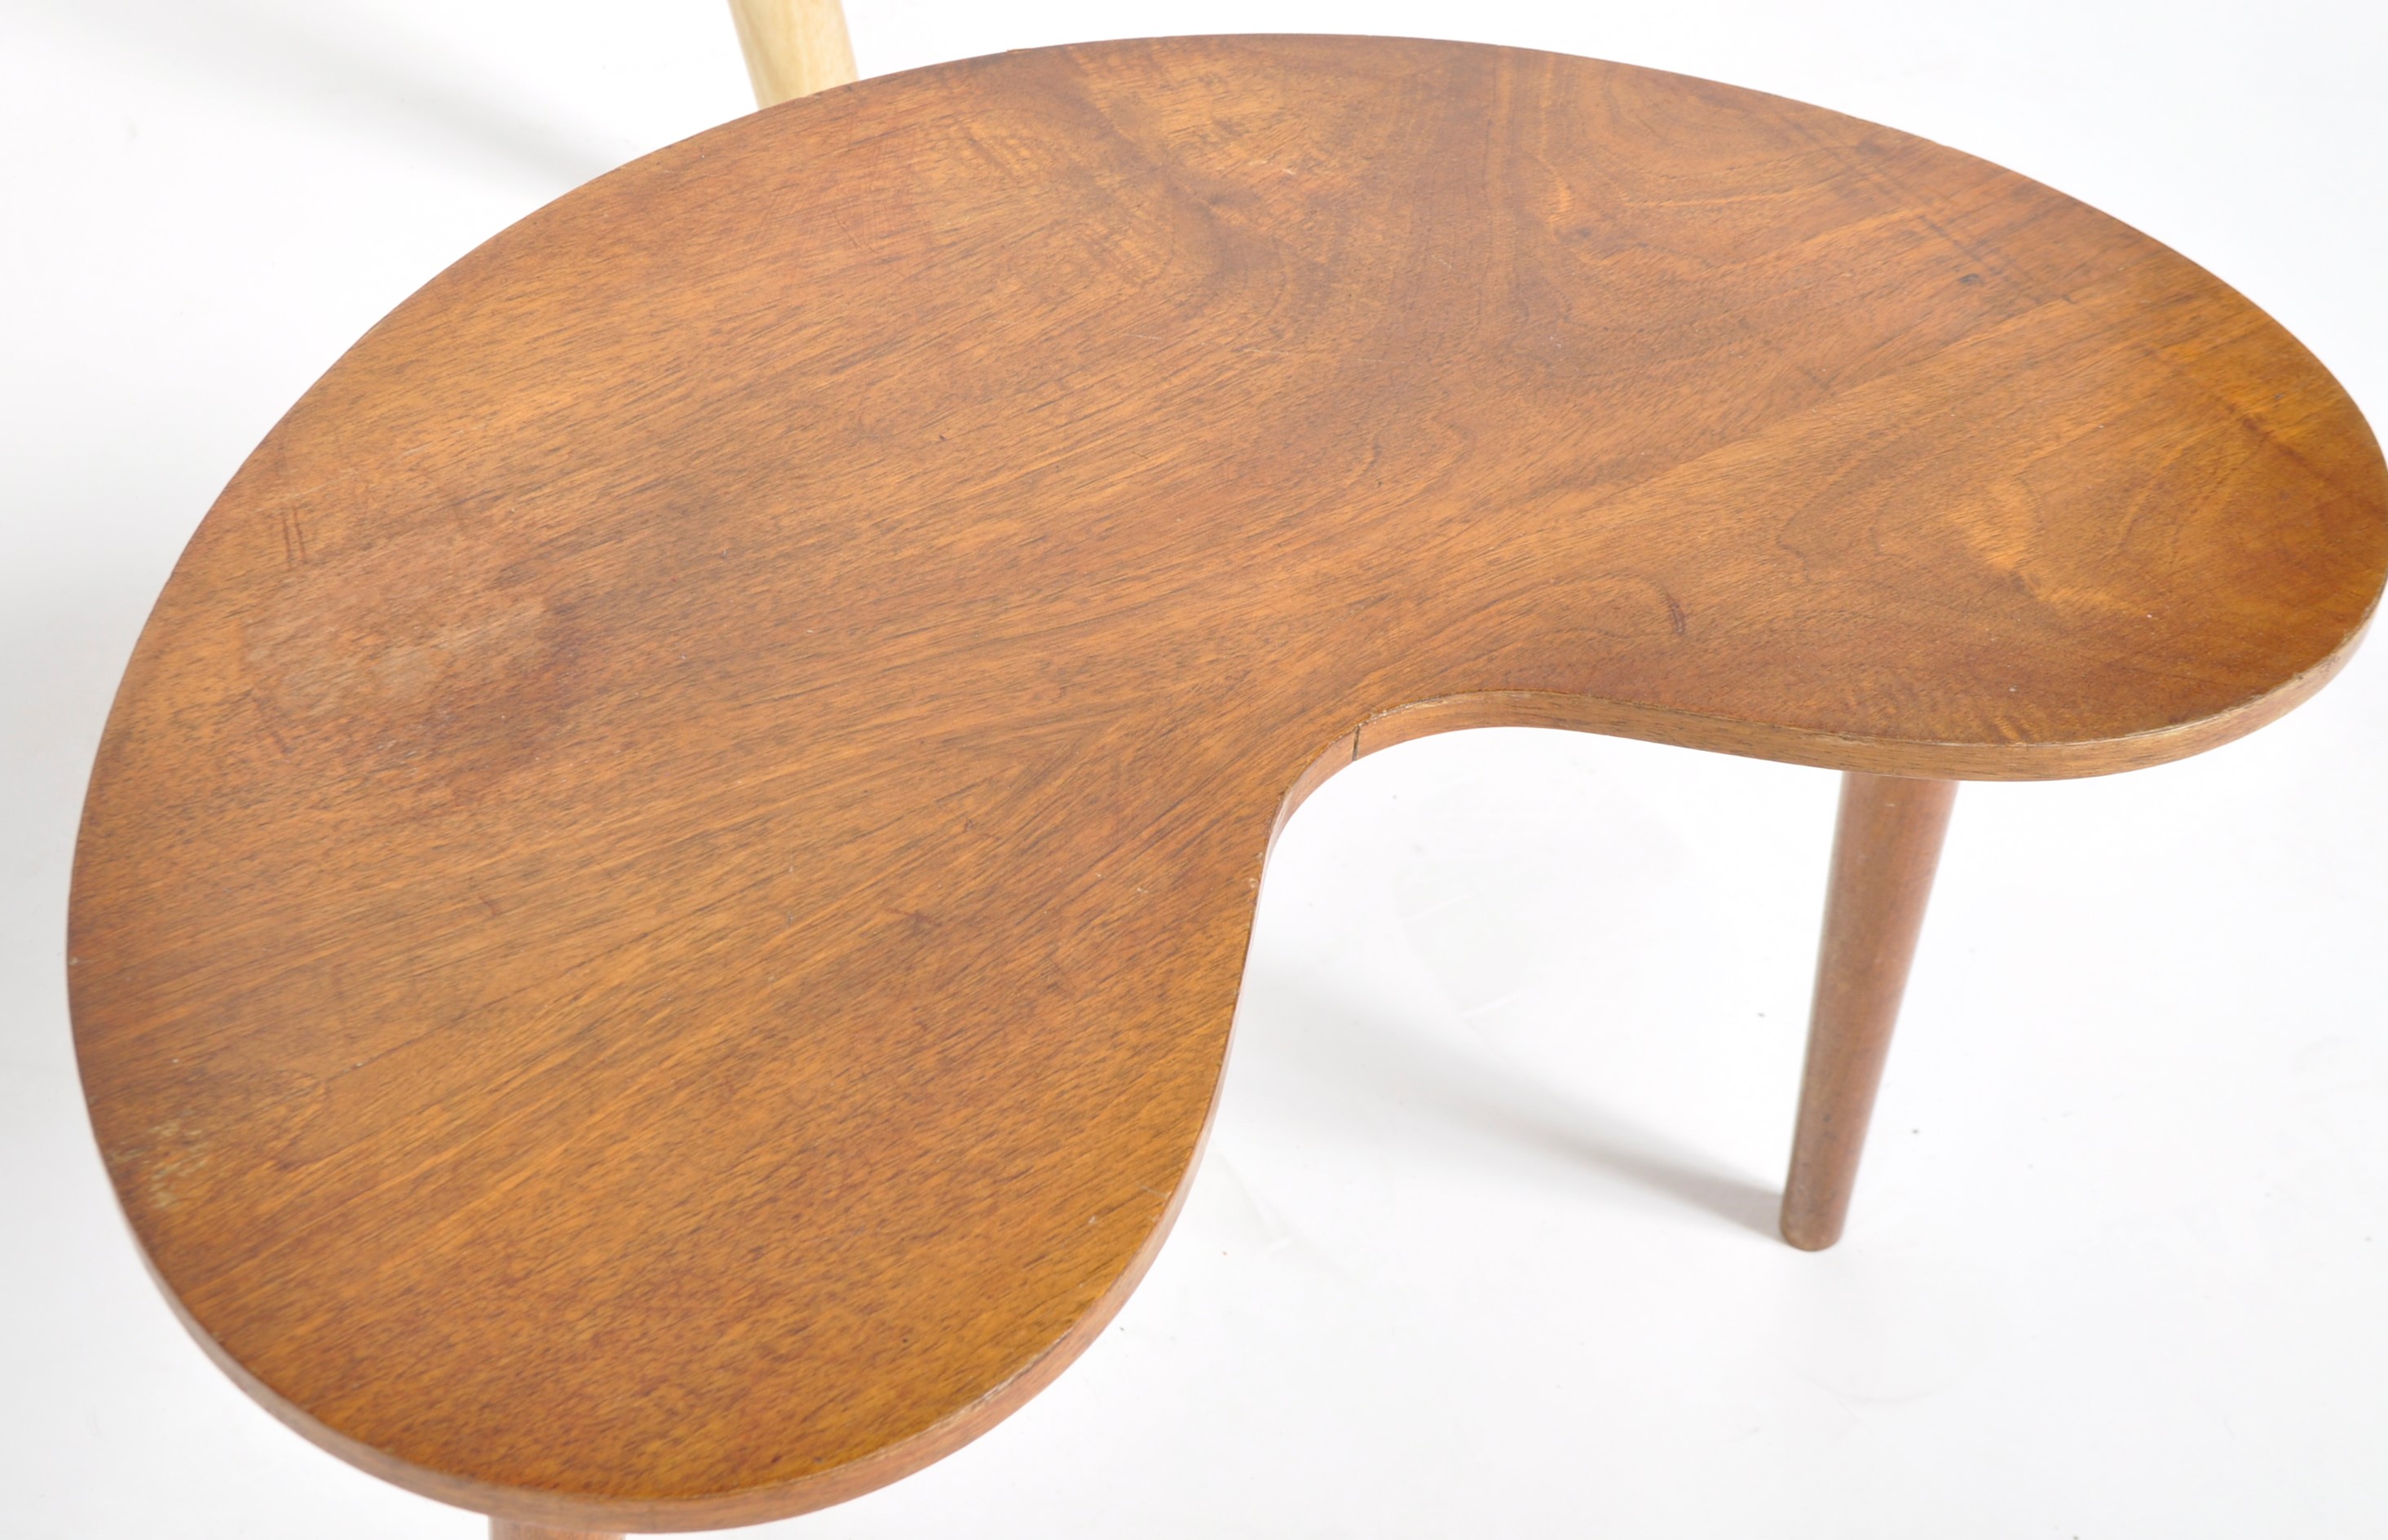 PAIR OF RETRO KIDNEY SHAPED LOW TABLE - Image 4 of 5